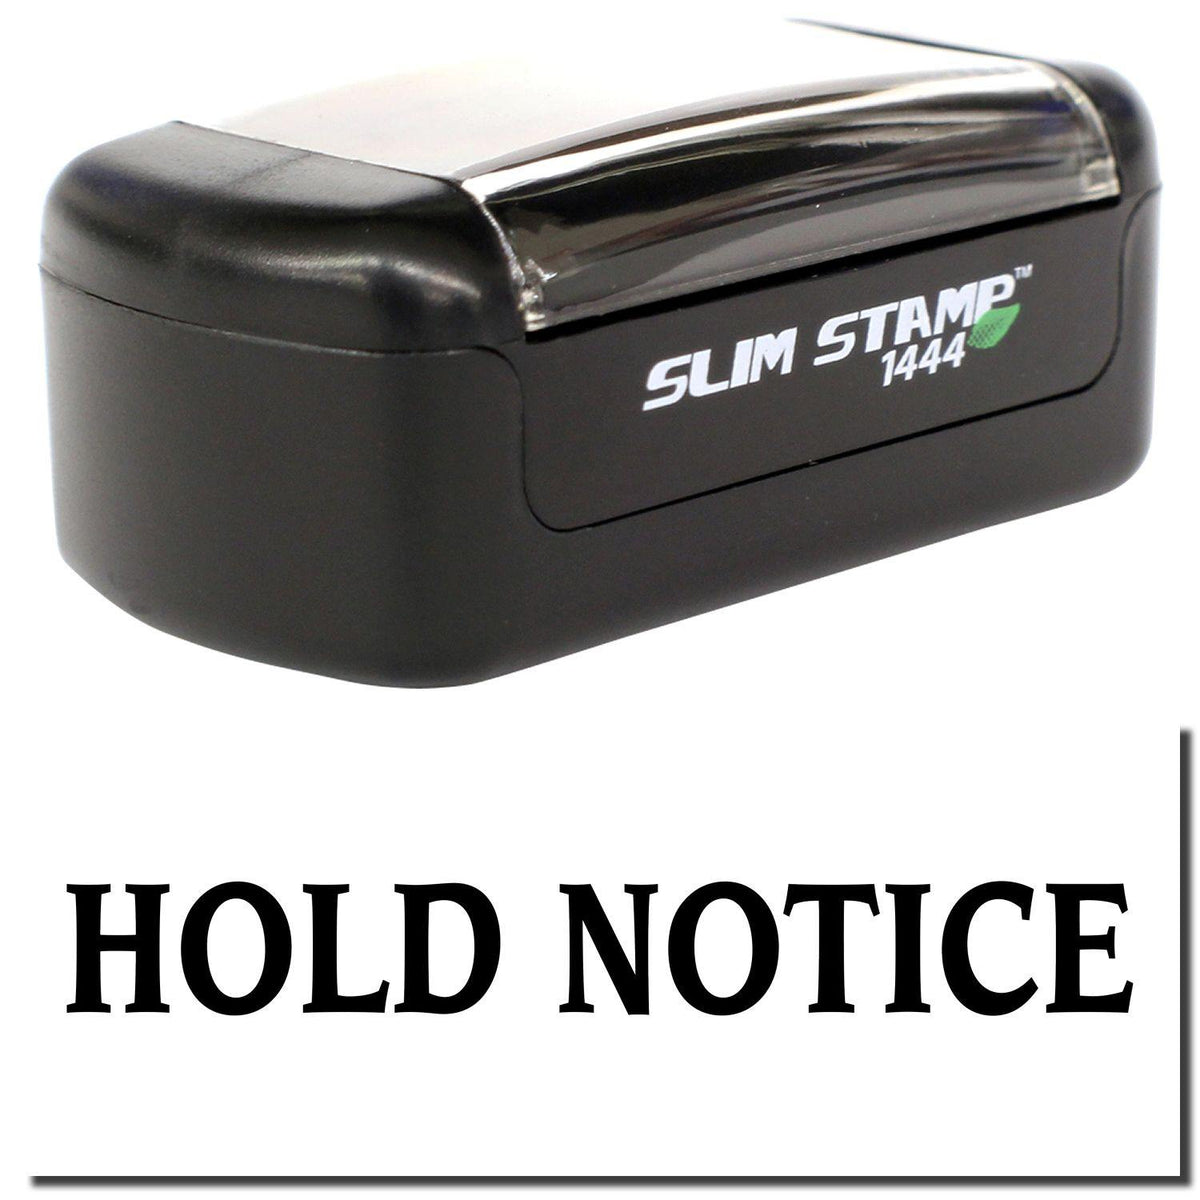 A stock office pre-inked stamp with a stamped image showing how the text &quot;HOLD NOTICE&quot; is displayed after stamping.